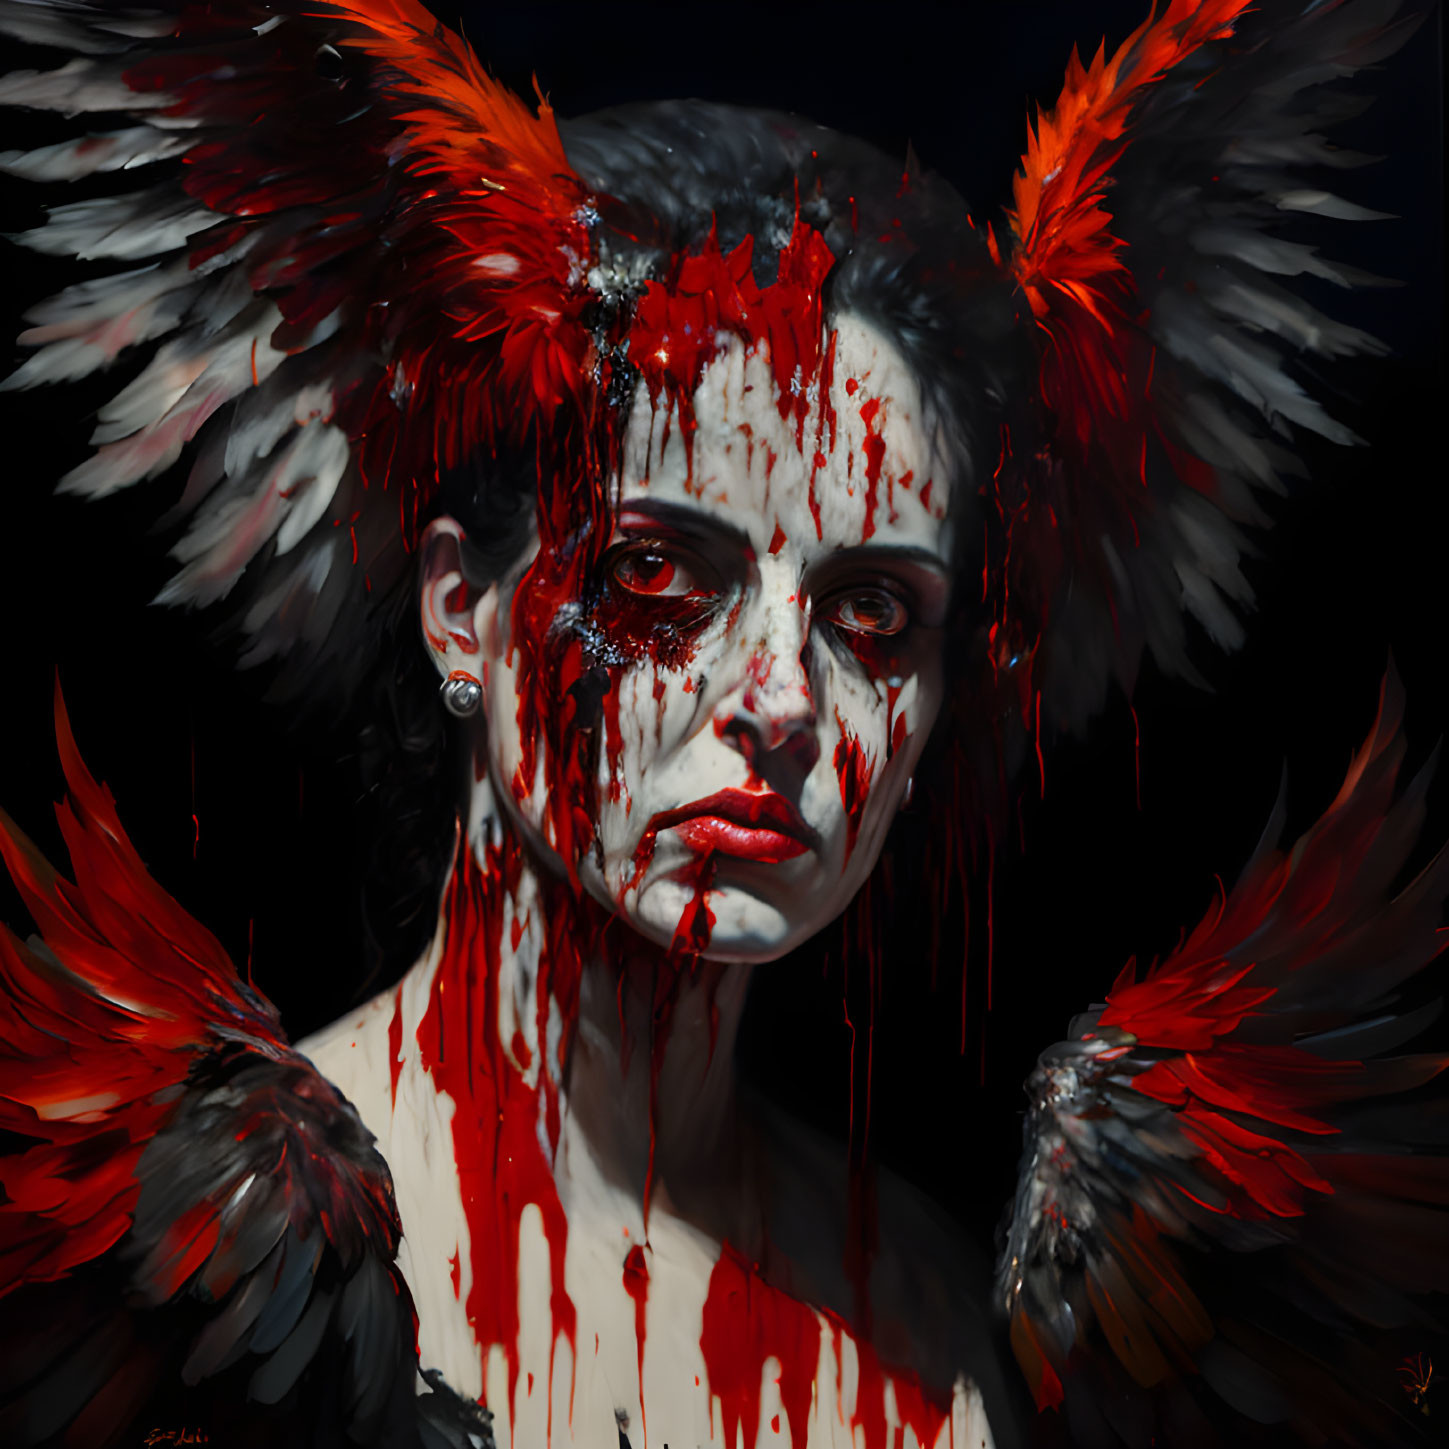 Artistic portrayal of person with striking eyes and red paint splatters, red and black feathered wings